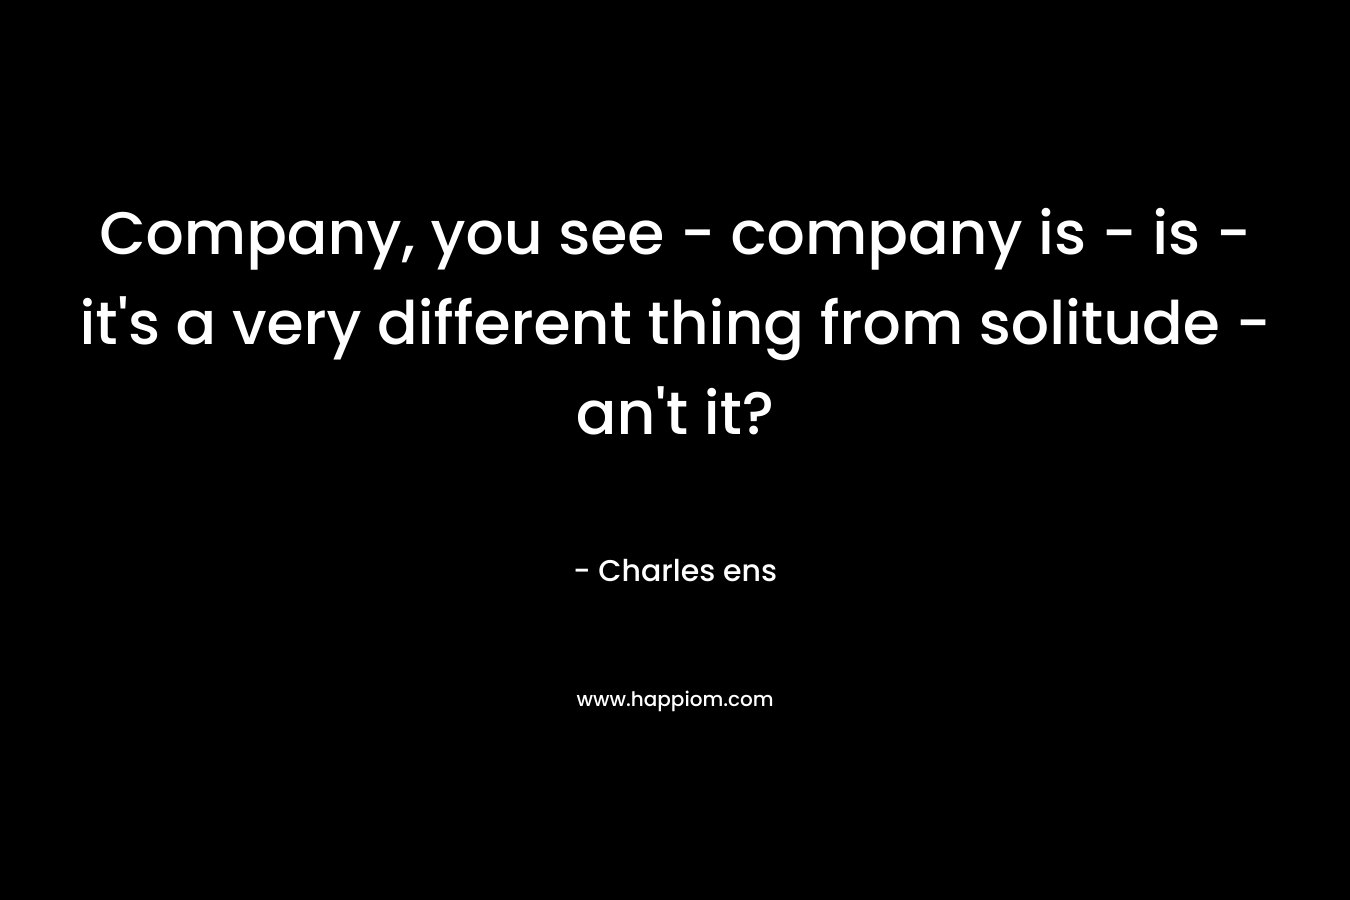 Company, you see - company is - is - it's a very different thing from solitude - an't it?